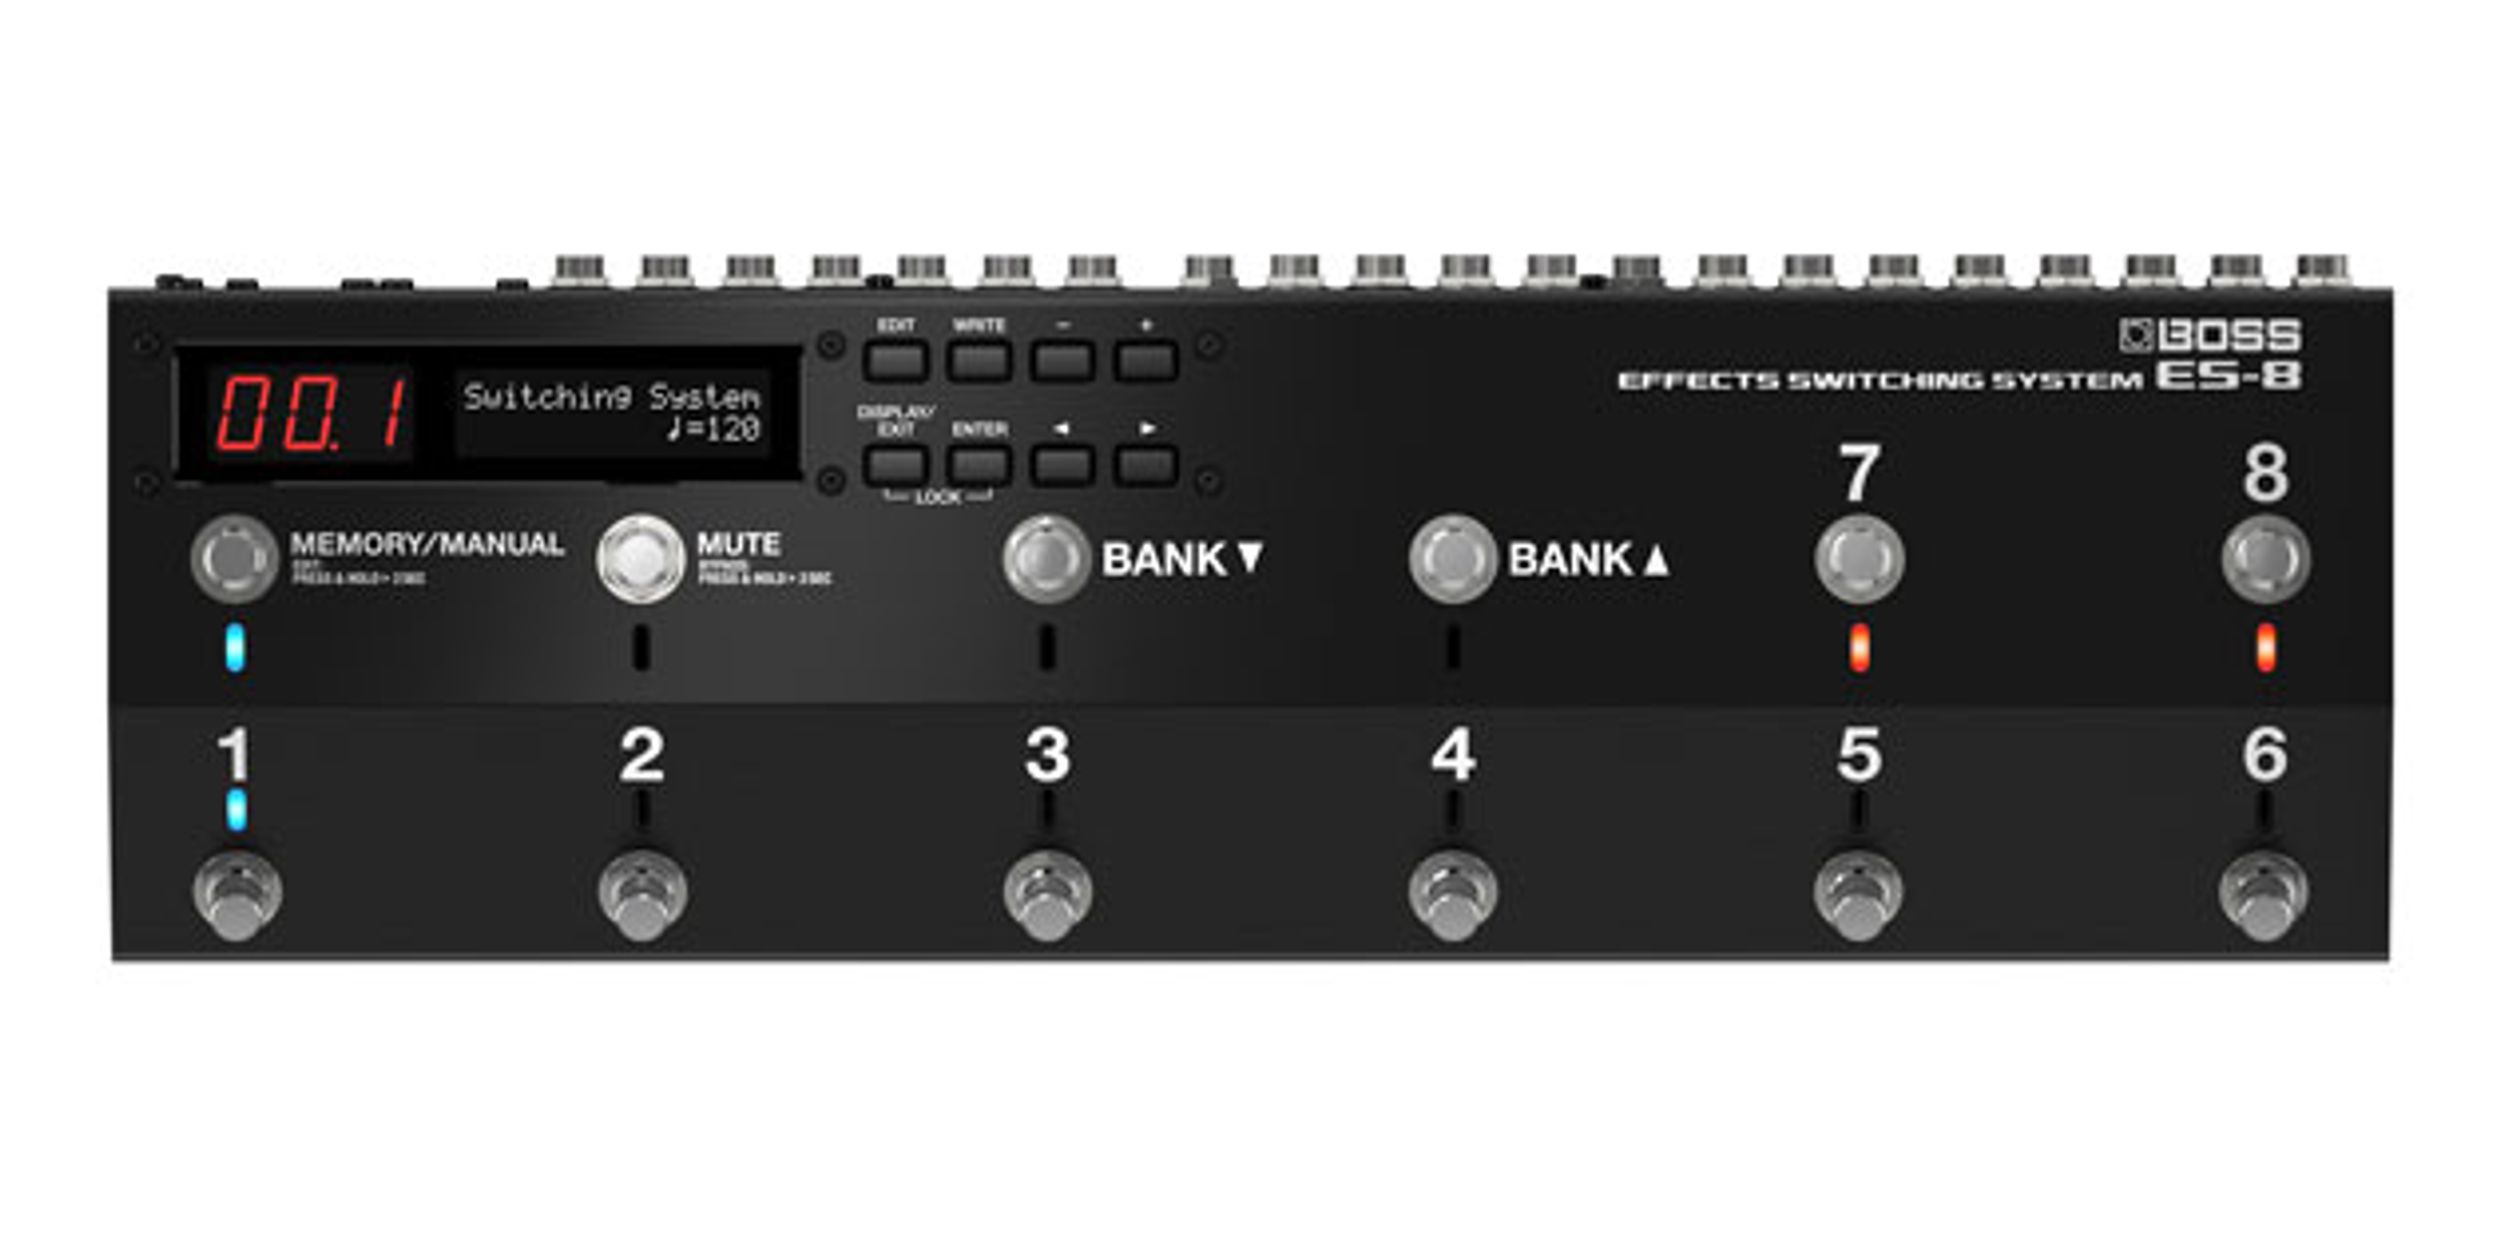 Boss Releases the ES-8 Effects Switching System and BB-1X Bass Driver